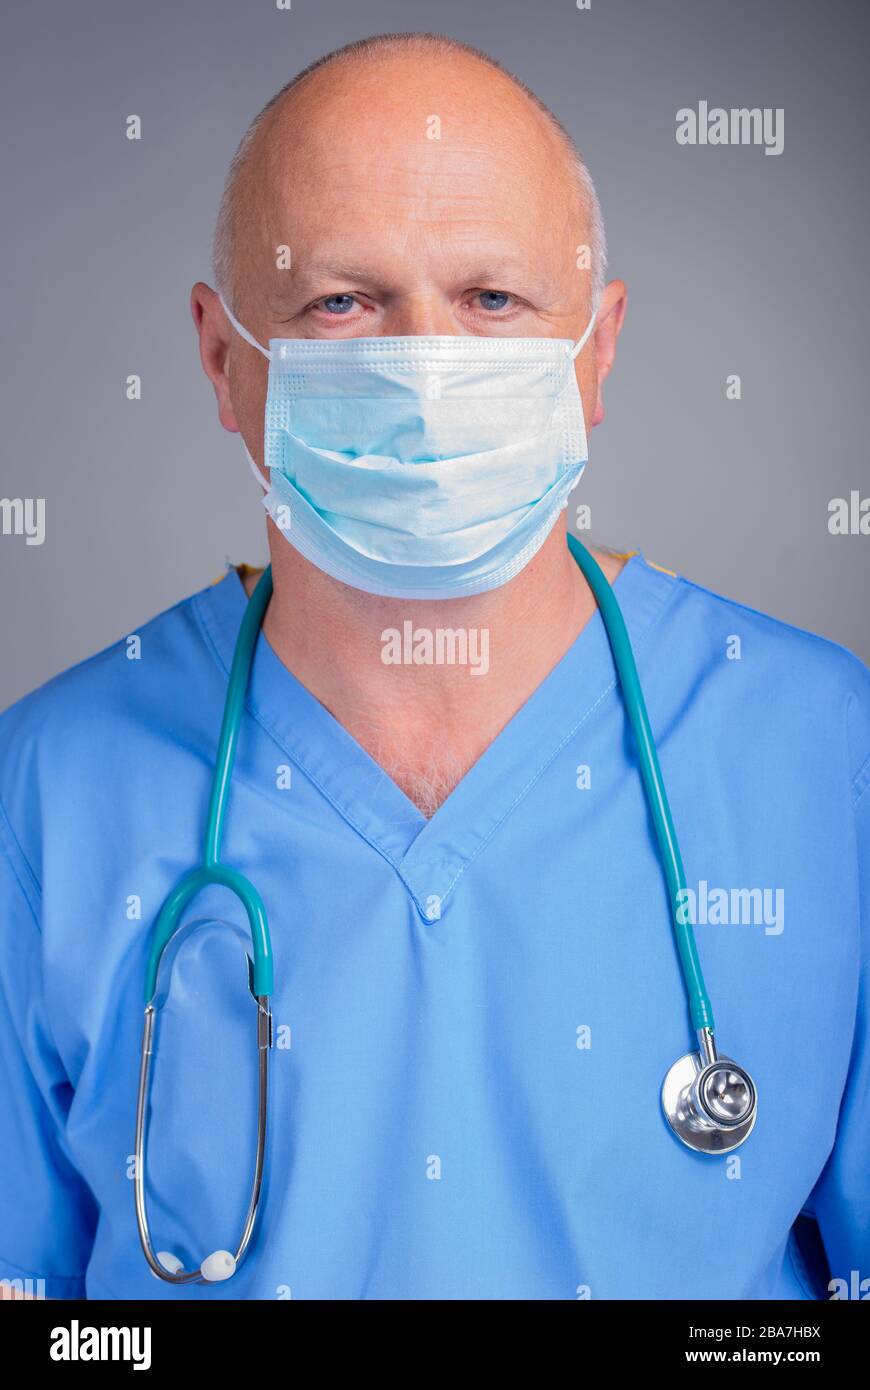 Portrait of a caucasian hospital doctor in blue scrubs, looking at the viewer & wearing a surgical mask with a stethoscope, against a grey background. Stock Photo